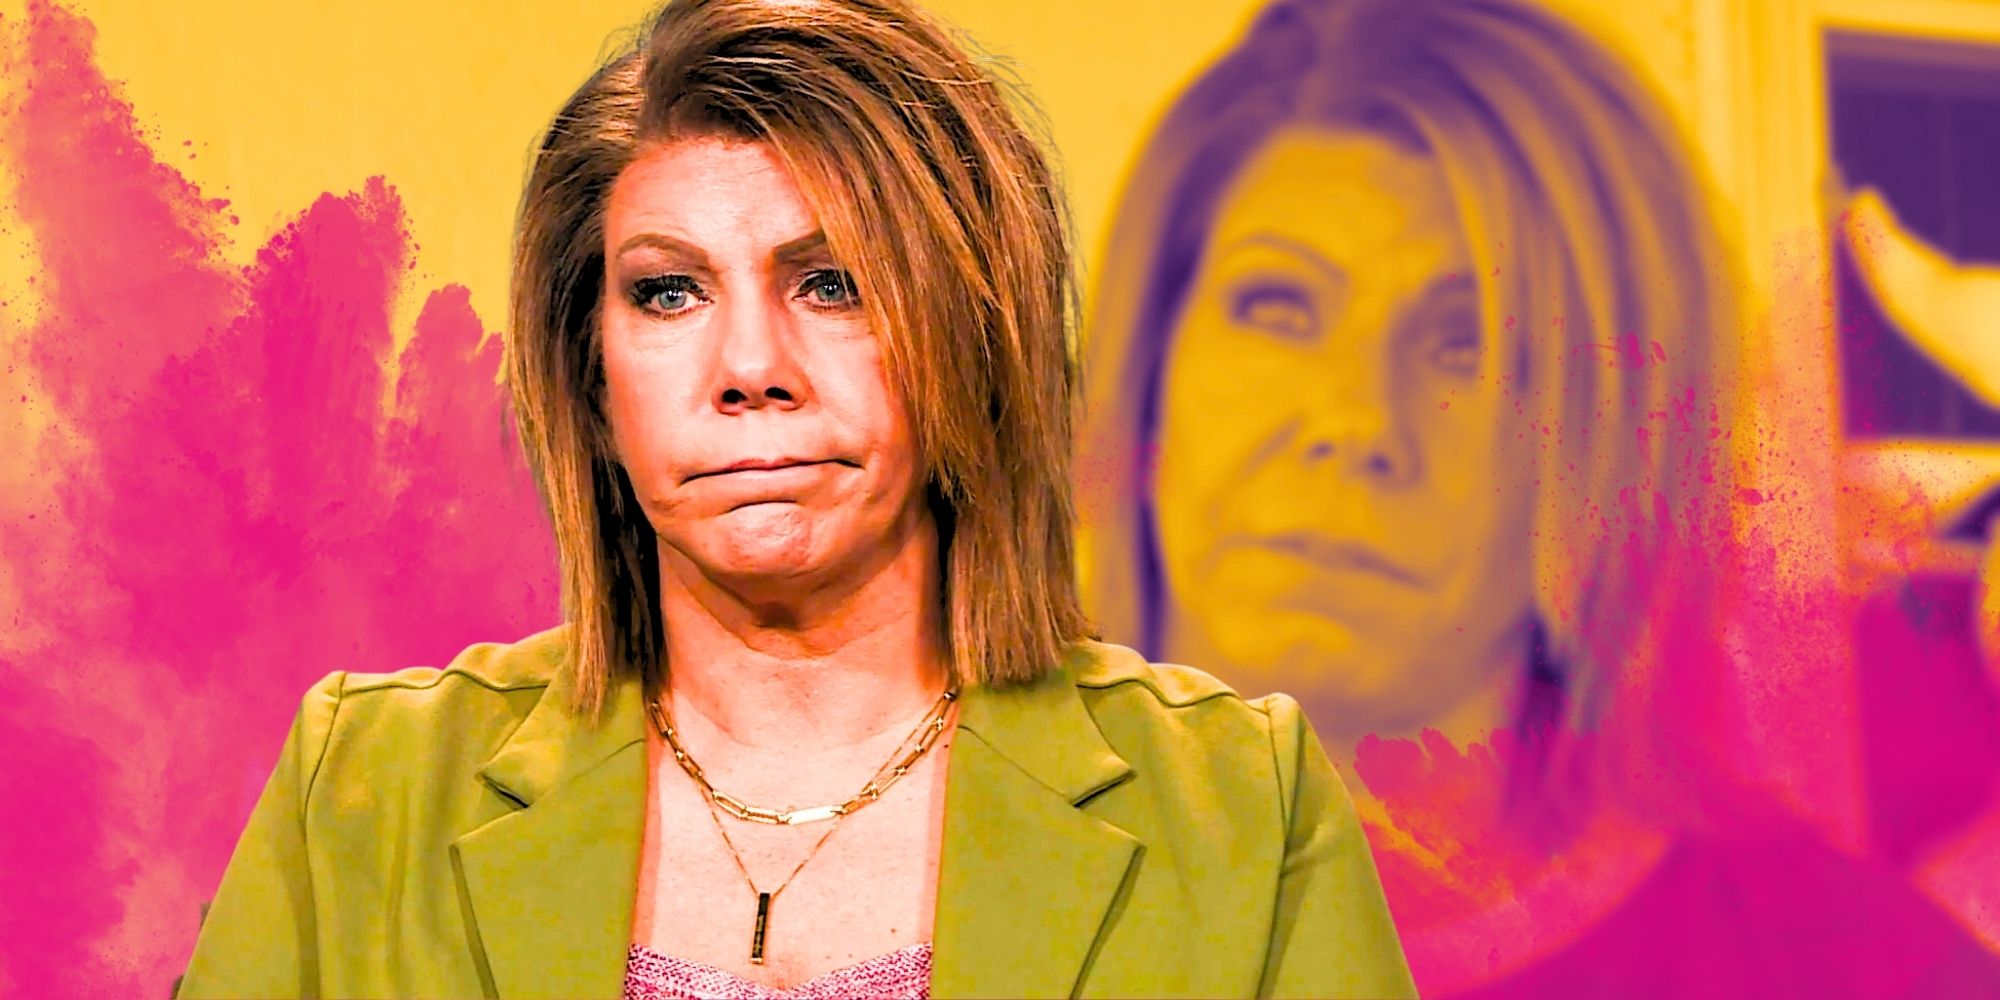 Meri brown looking mad in a montage with a pink and yellow background